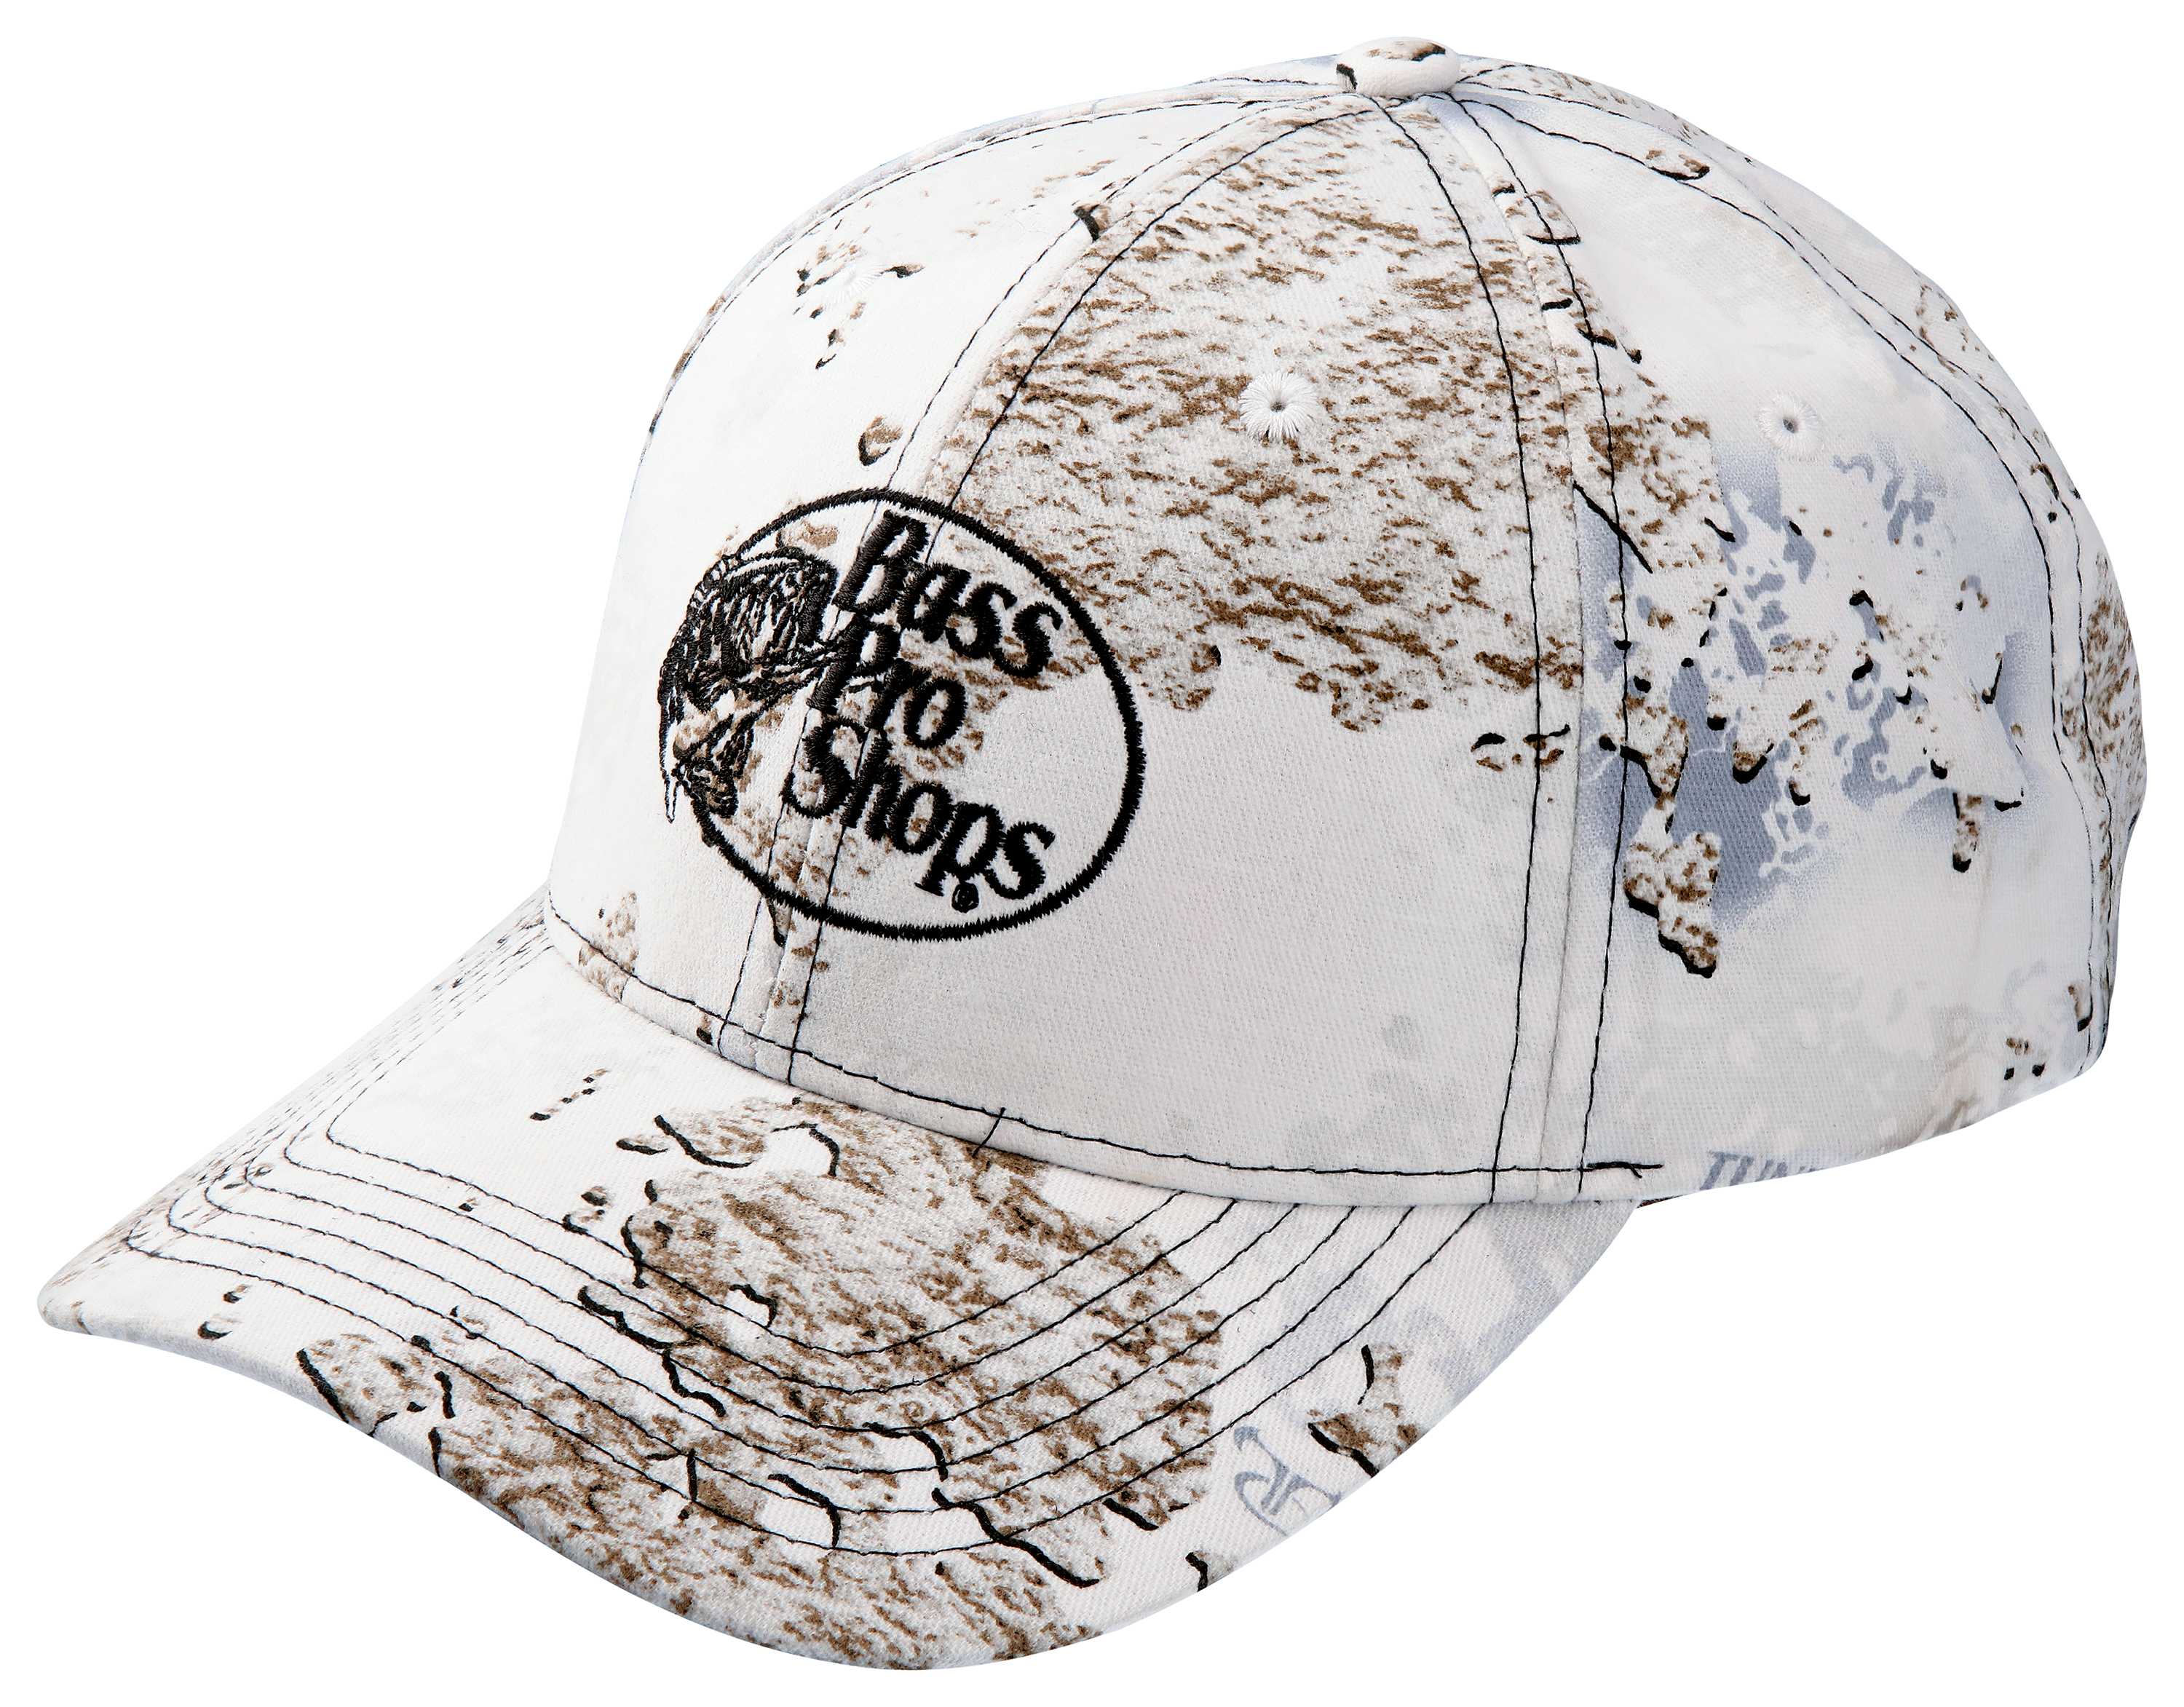 Bass Pro Shops Army Hats for Men